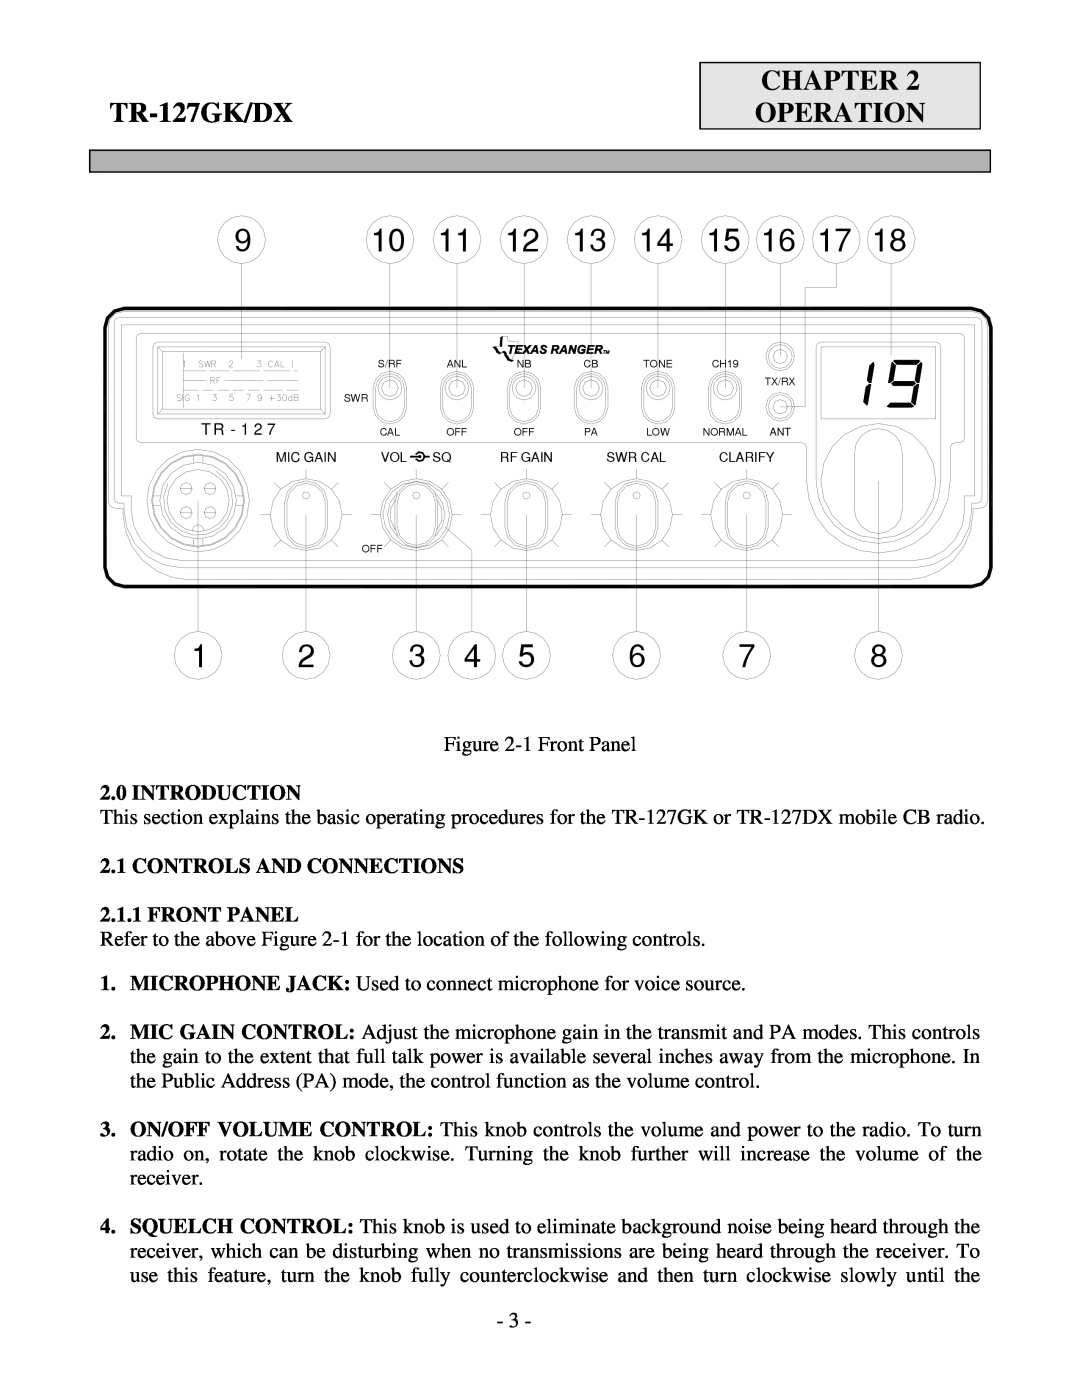 Ranger TR-127GK/DX service manual 910 11 12 13, Operation, Introduction, CONTROLS AND CONNECTIONS 2.1.1 FRONT PANEL 